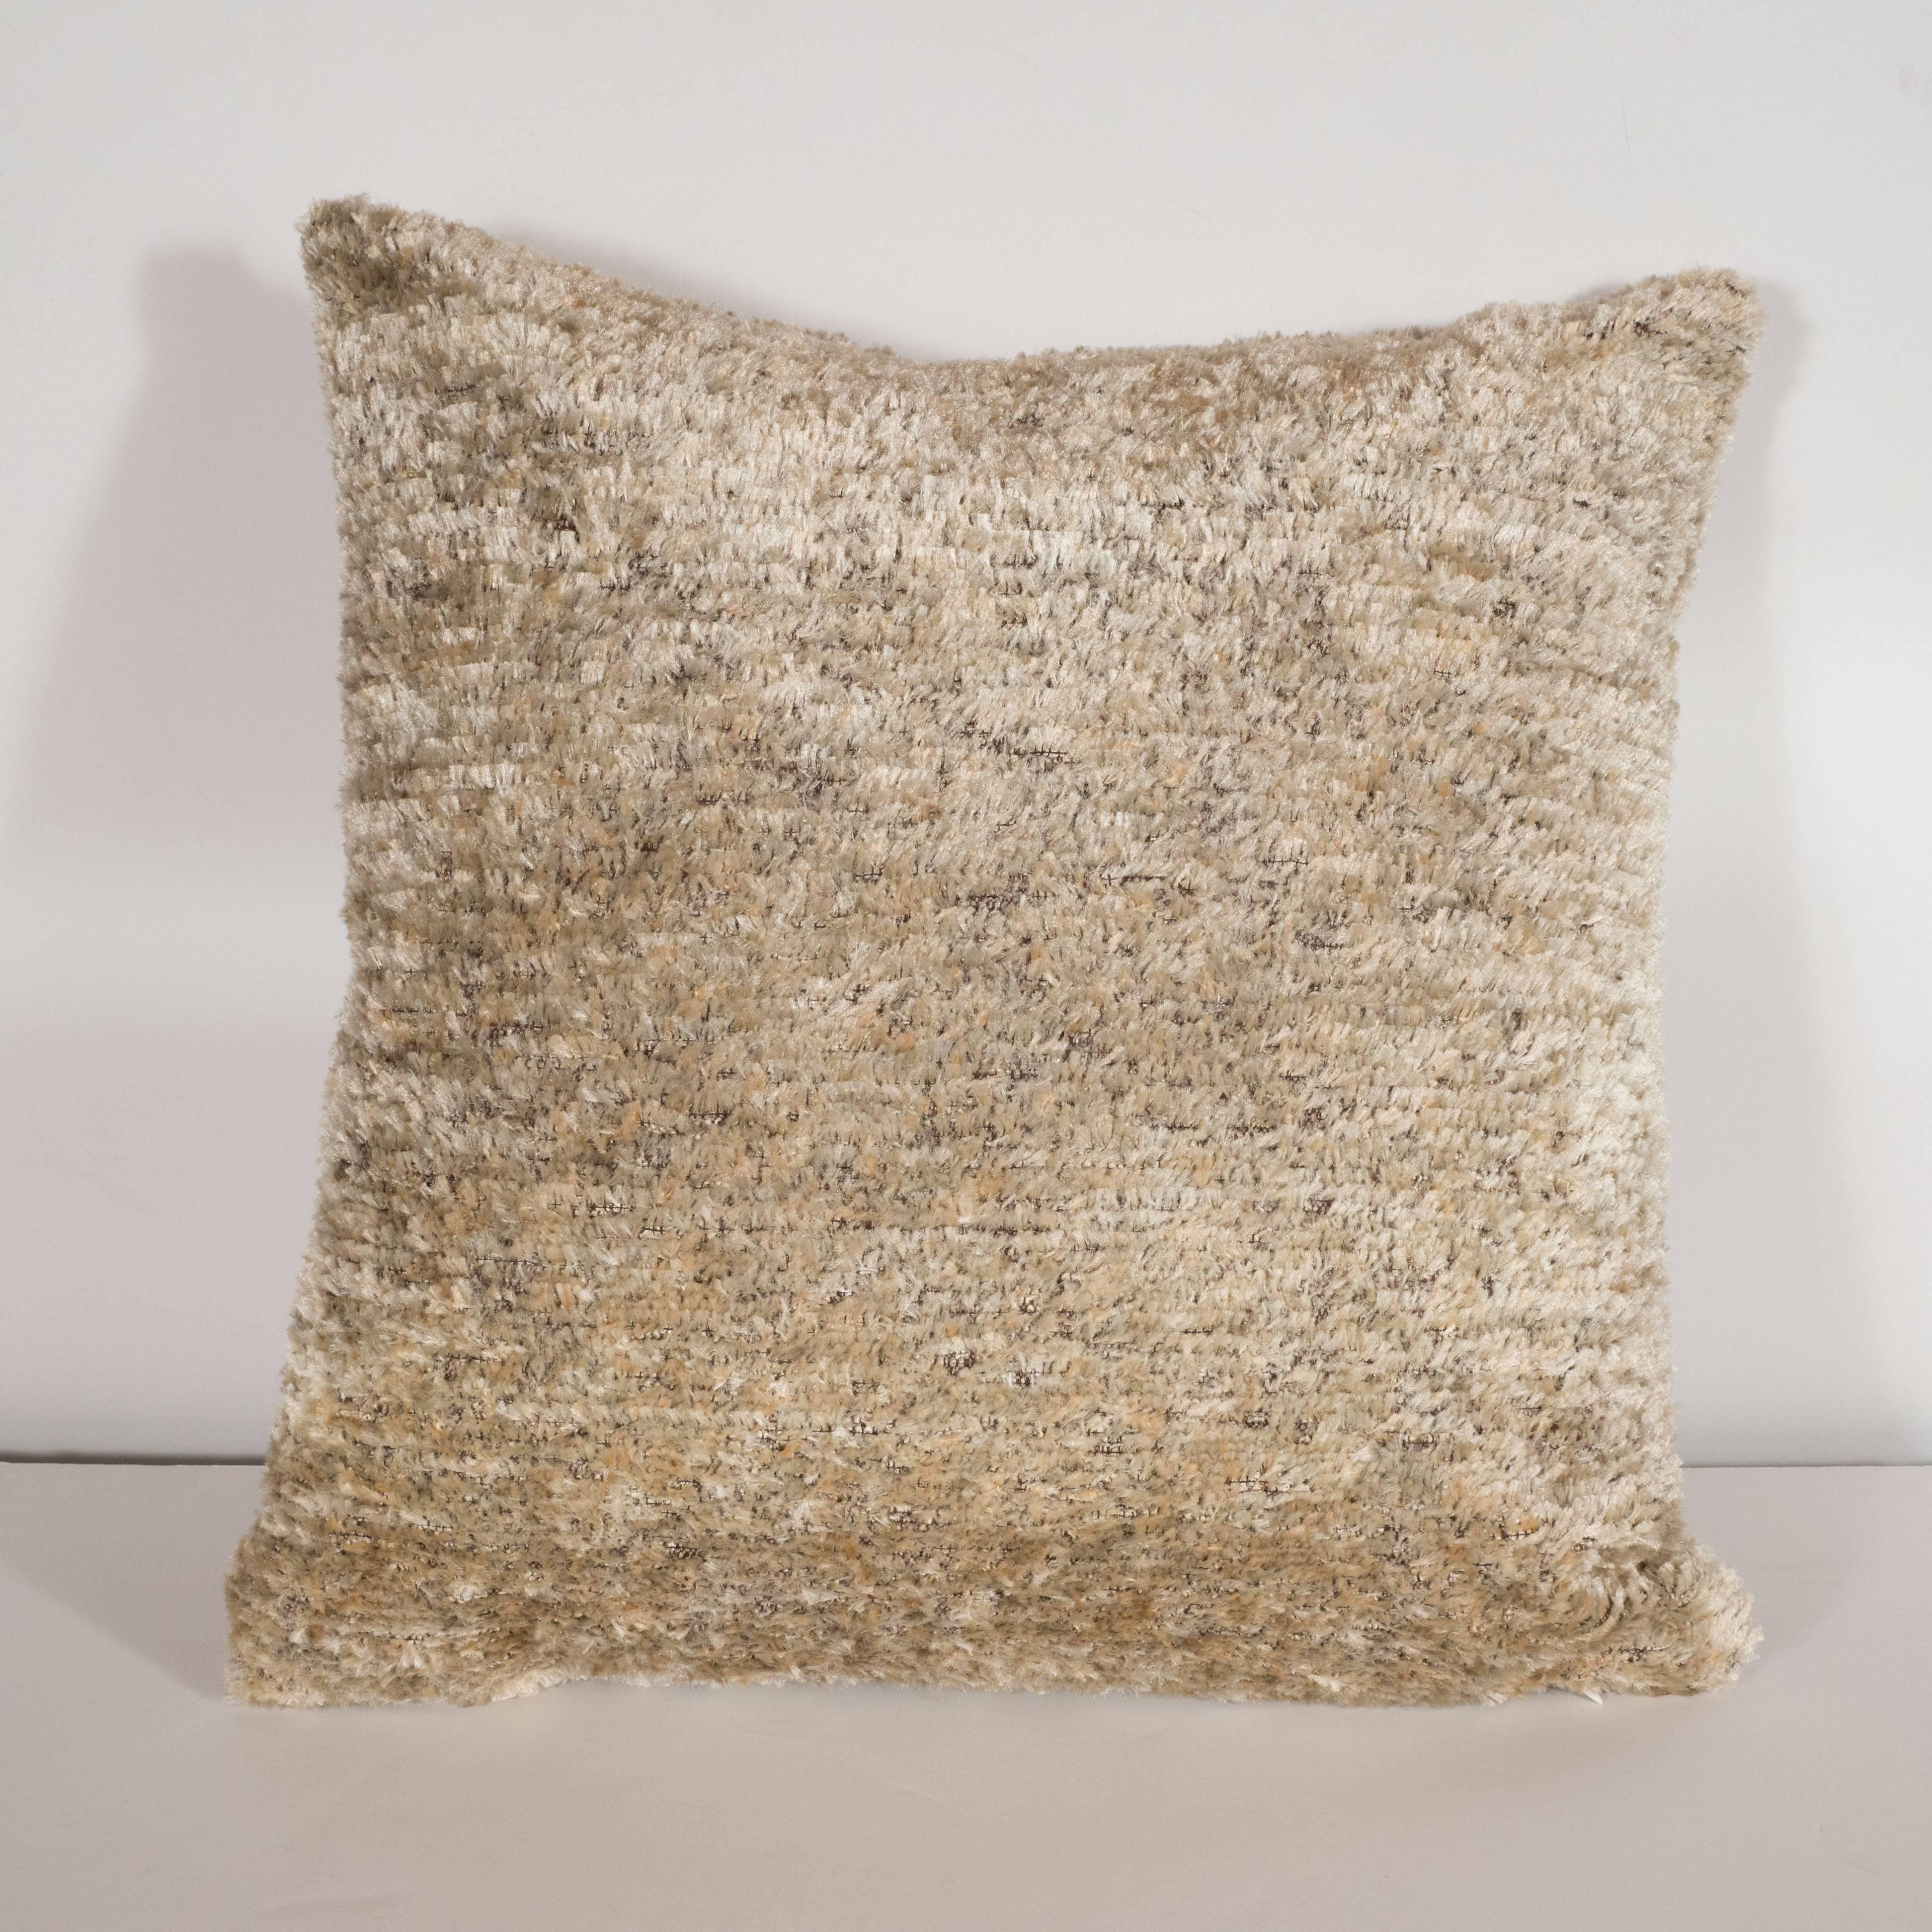 Custom designed champagne colored pillow with white Mongolian lambswool circlea this stunning and elegant modernist pillow was custom designed in the United States. It features a solid back composed of a silk/wool/synthetic blend in a champagne hue,